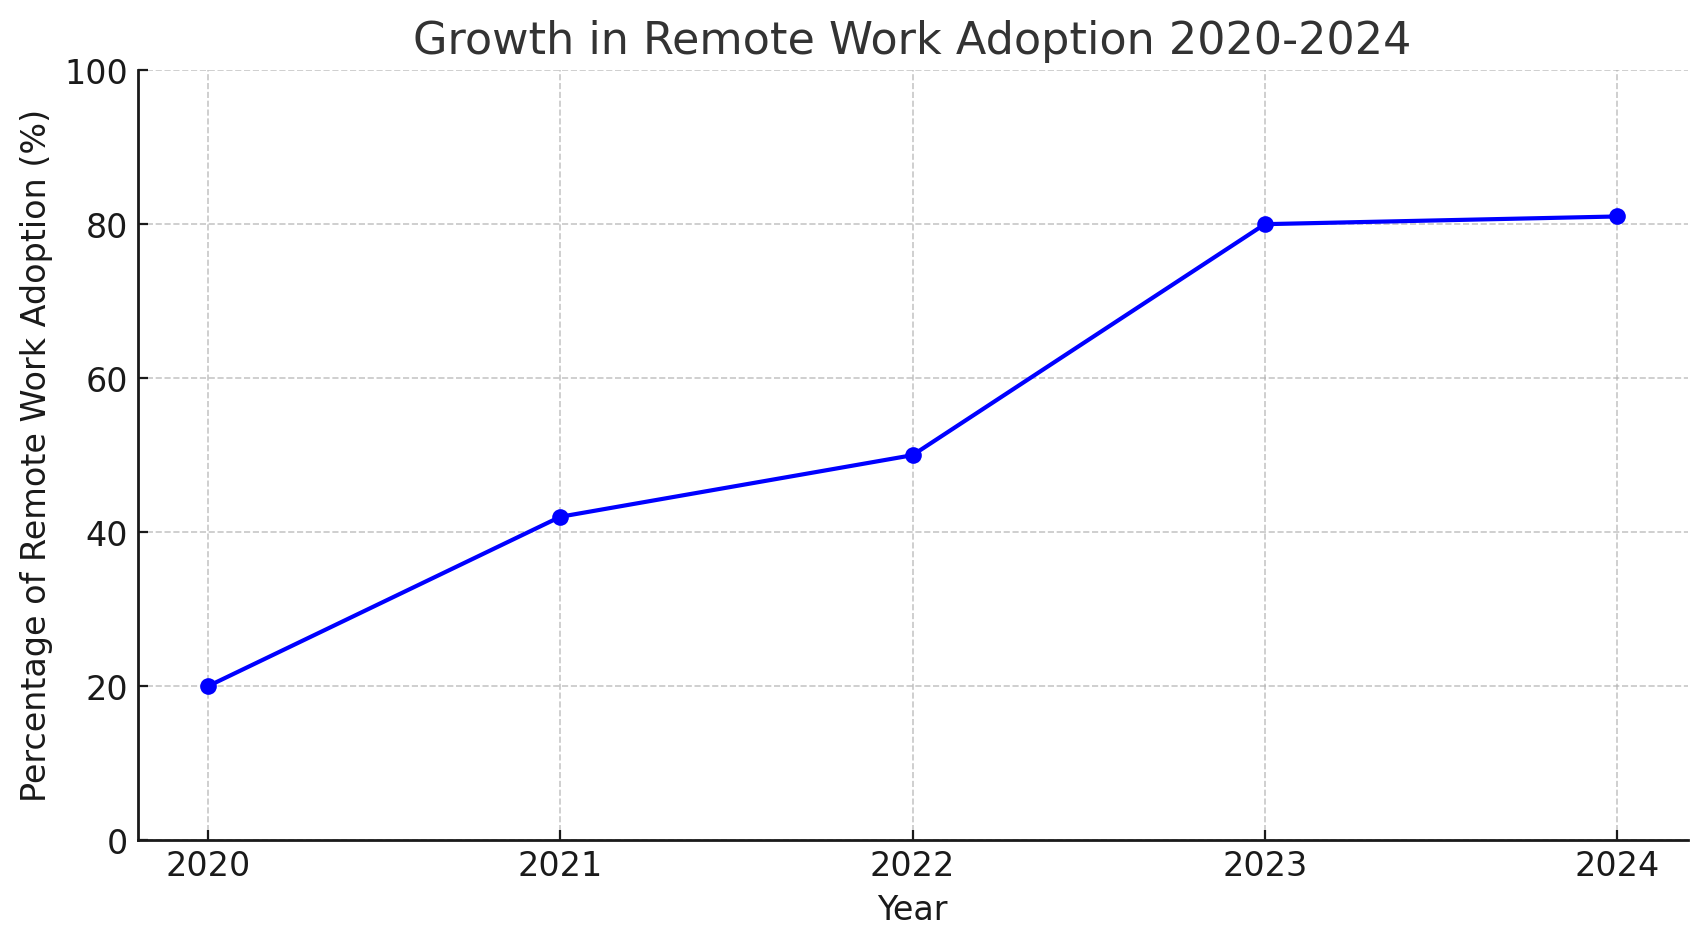 Line graph showing the growth in remote work adoption from 2020 to 2024. The trend begins at 20% in 2020, rising to 42% in 2021, 50% in 2022, peaking at 80% in 2023, and leveling off to 81% in 2024. The graph illustrates a steady increase in remote work practices, highlighting a significant and lasting shift in work habits towards more flexible working environments.